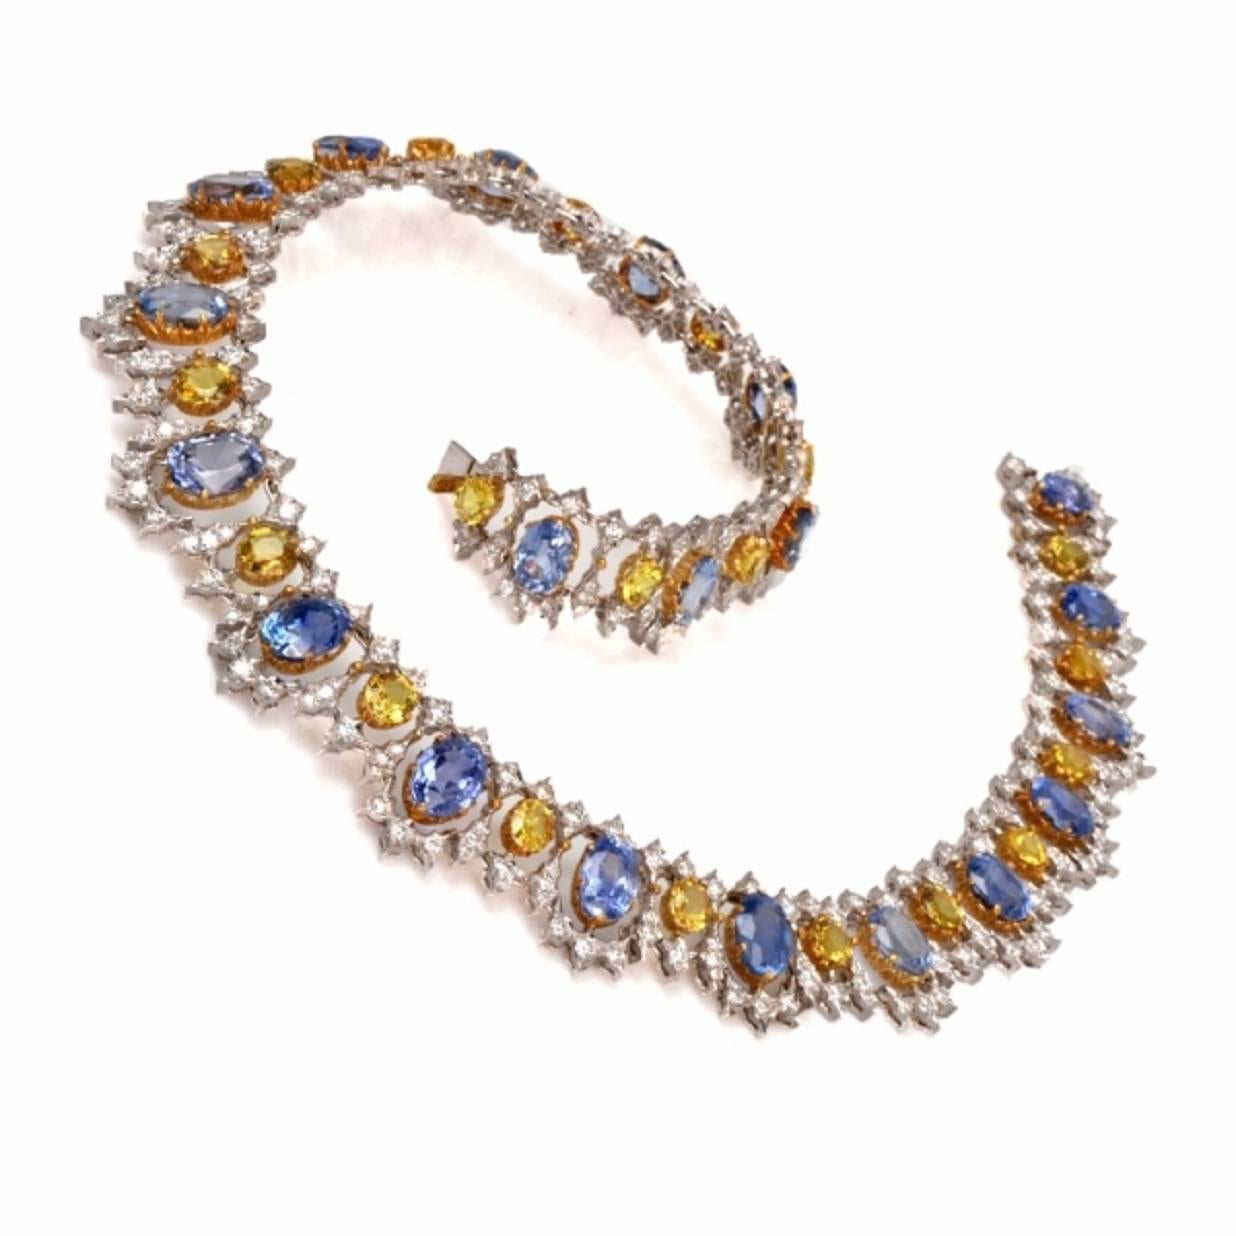 This rare Buccllati necklace is crafted in a combination 18K white and yellow gold. 

This stunning necklace is 4esplendent in 20 genuine oval cut GIA certified natural blue sapphires approx: 62.00cttw, and complemented by 20 alternately set oval